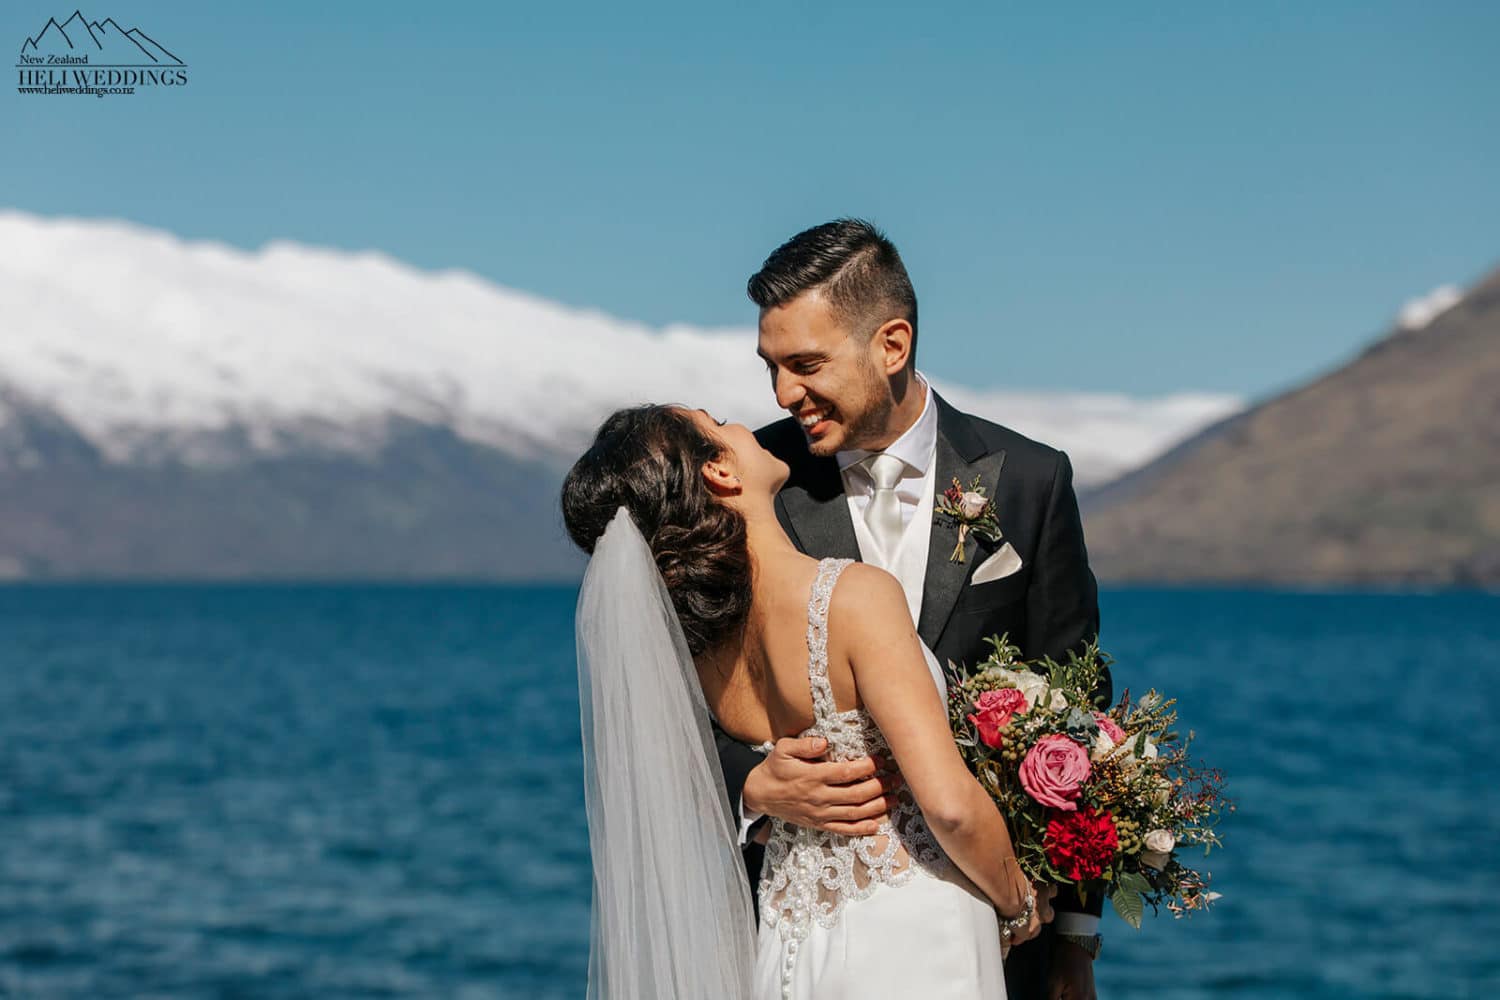 Wedding by the lake in Queenstown